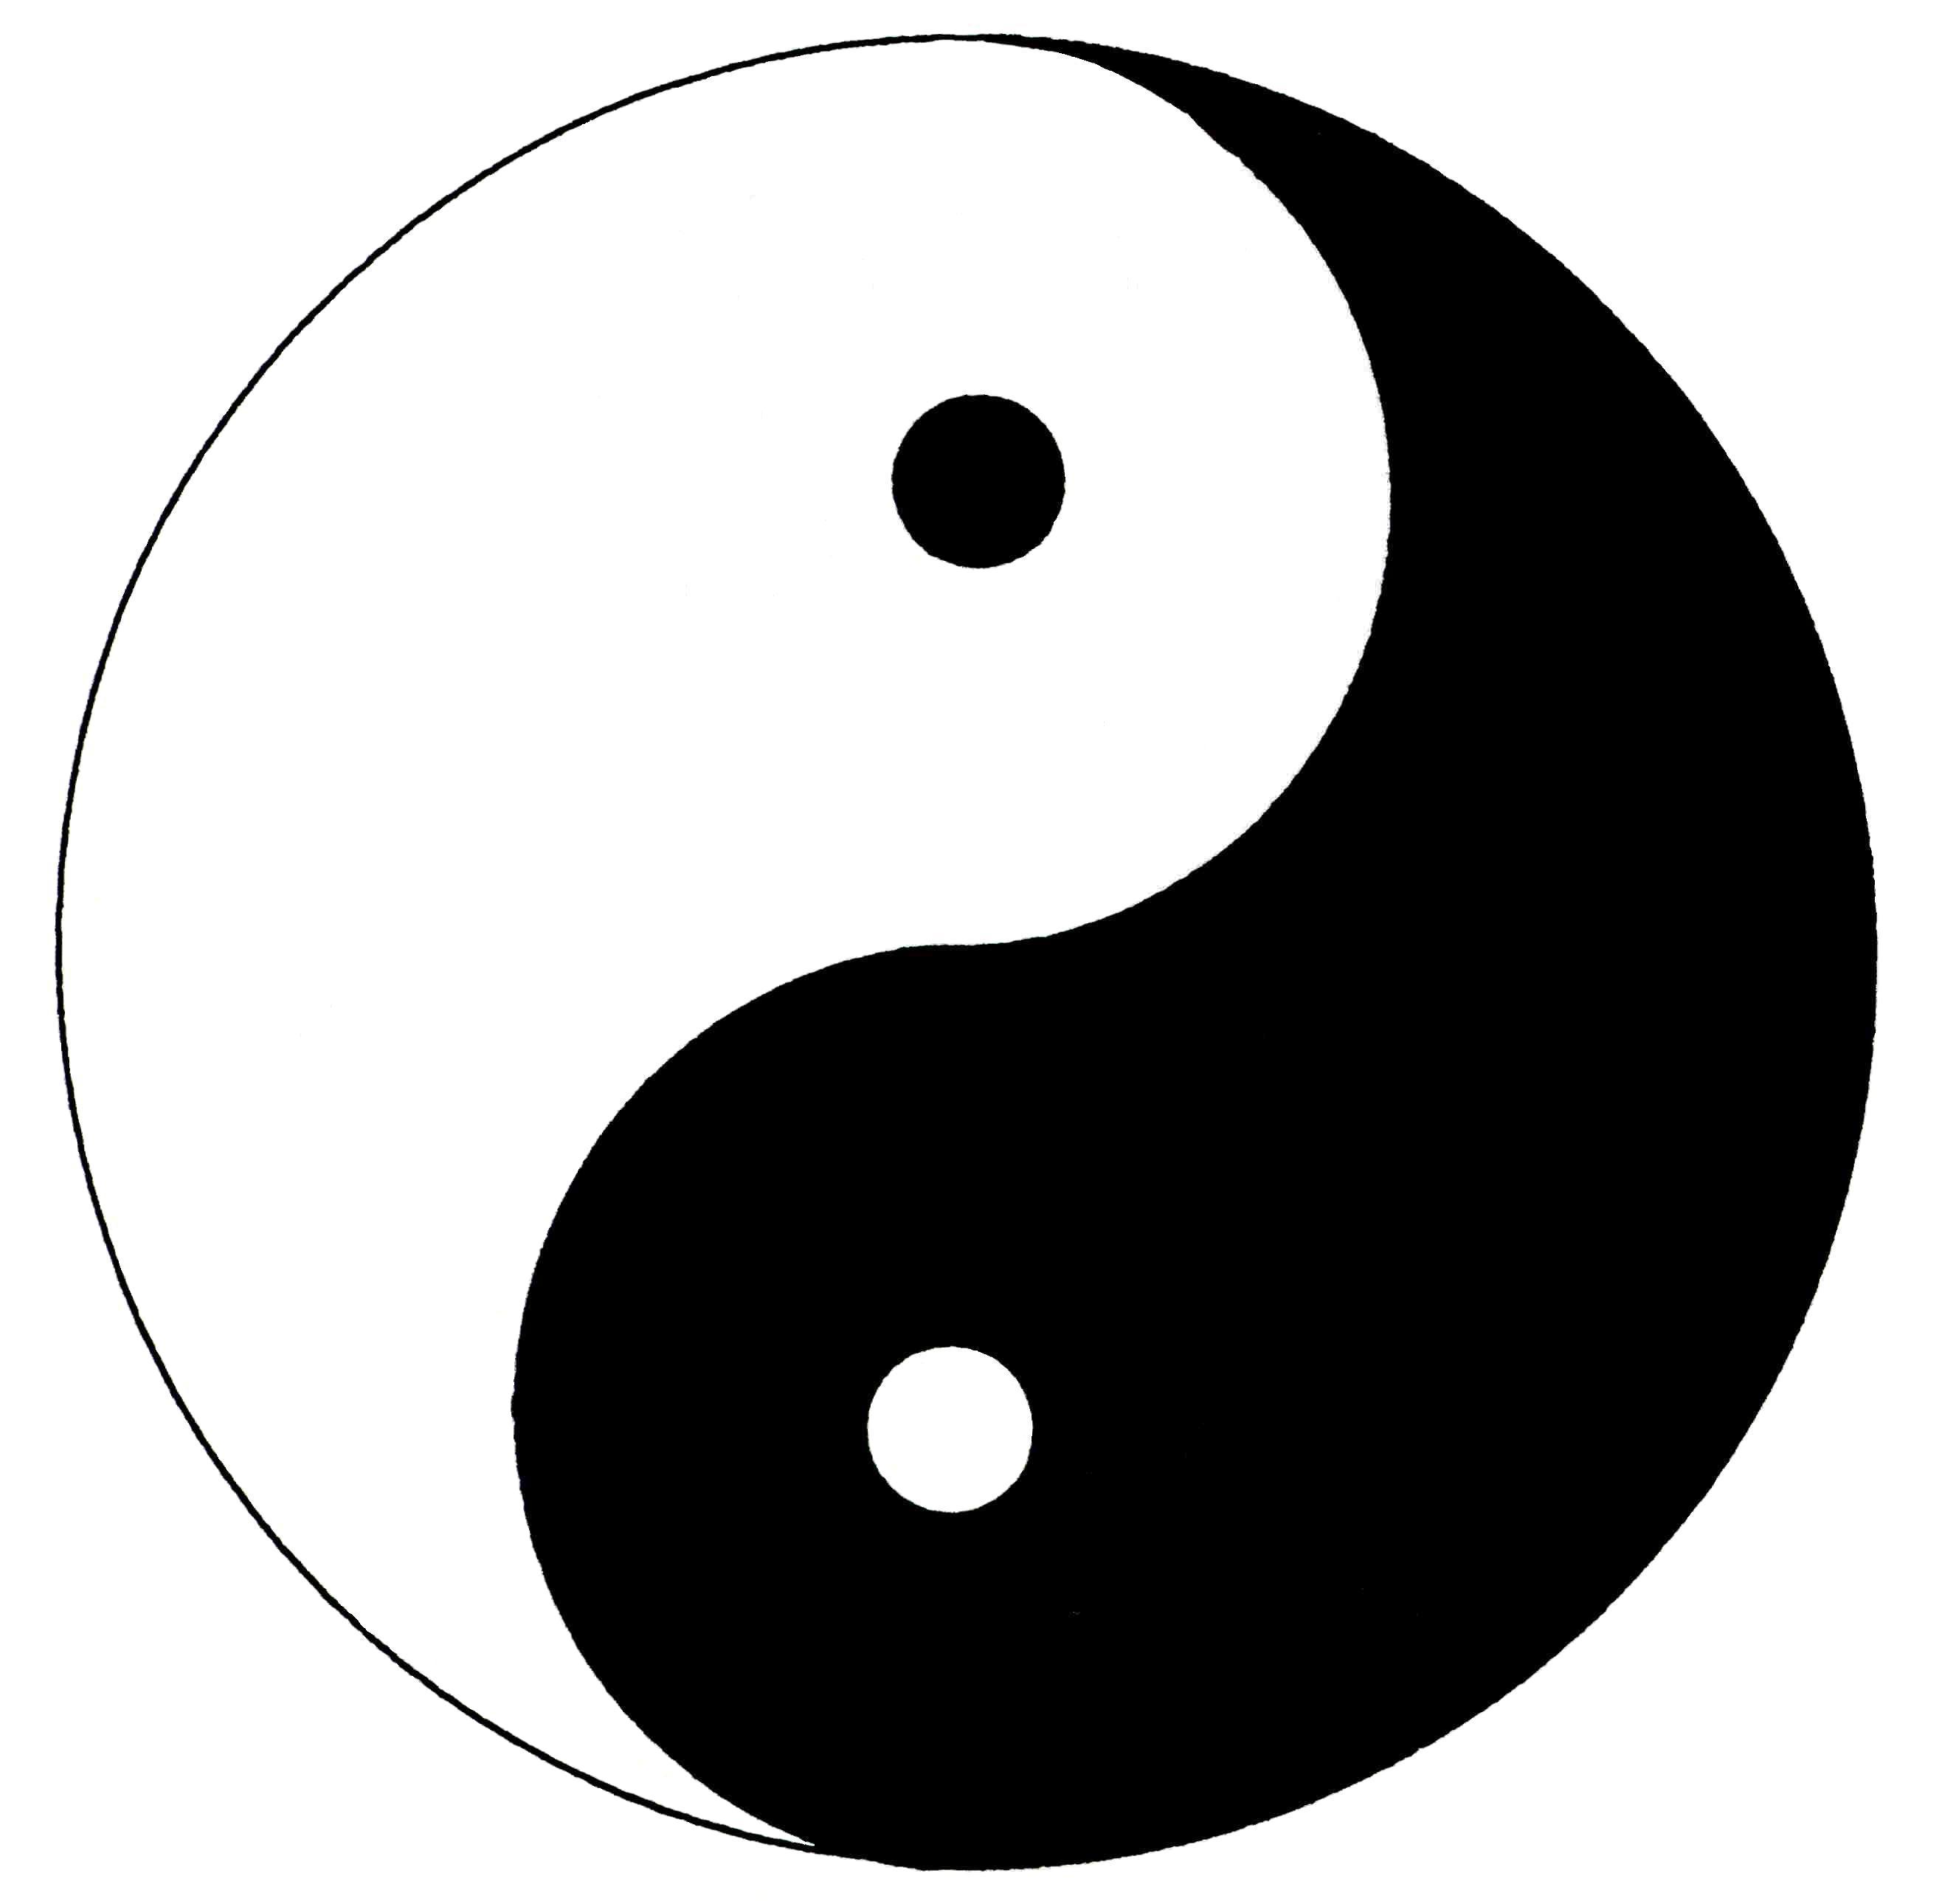 Ying Yang | Free Images at Clker.com - vector clip art online, royalty